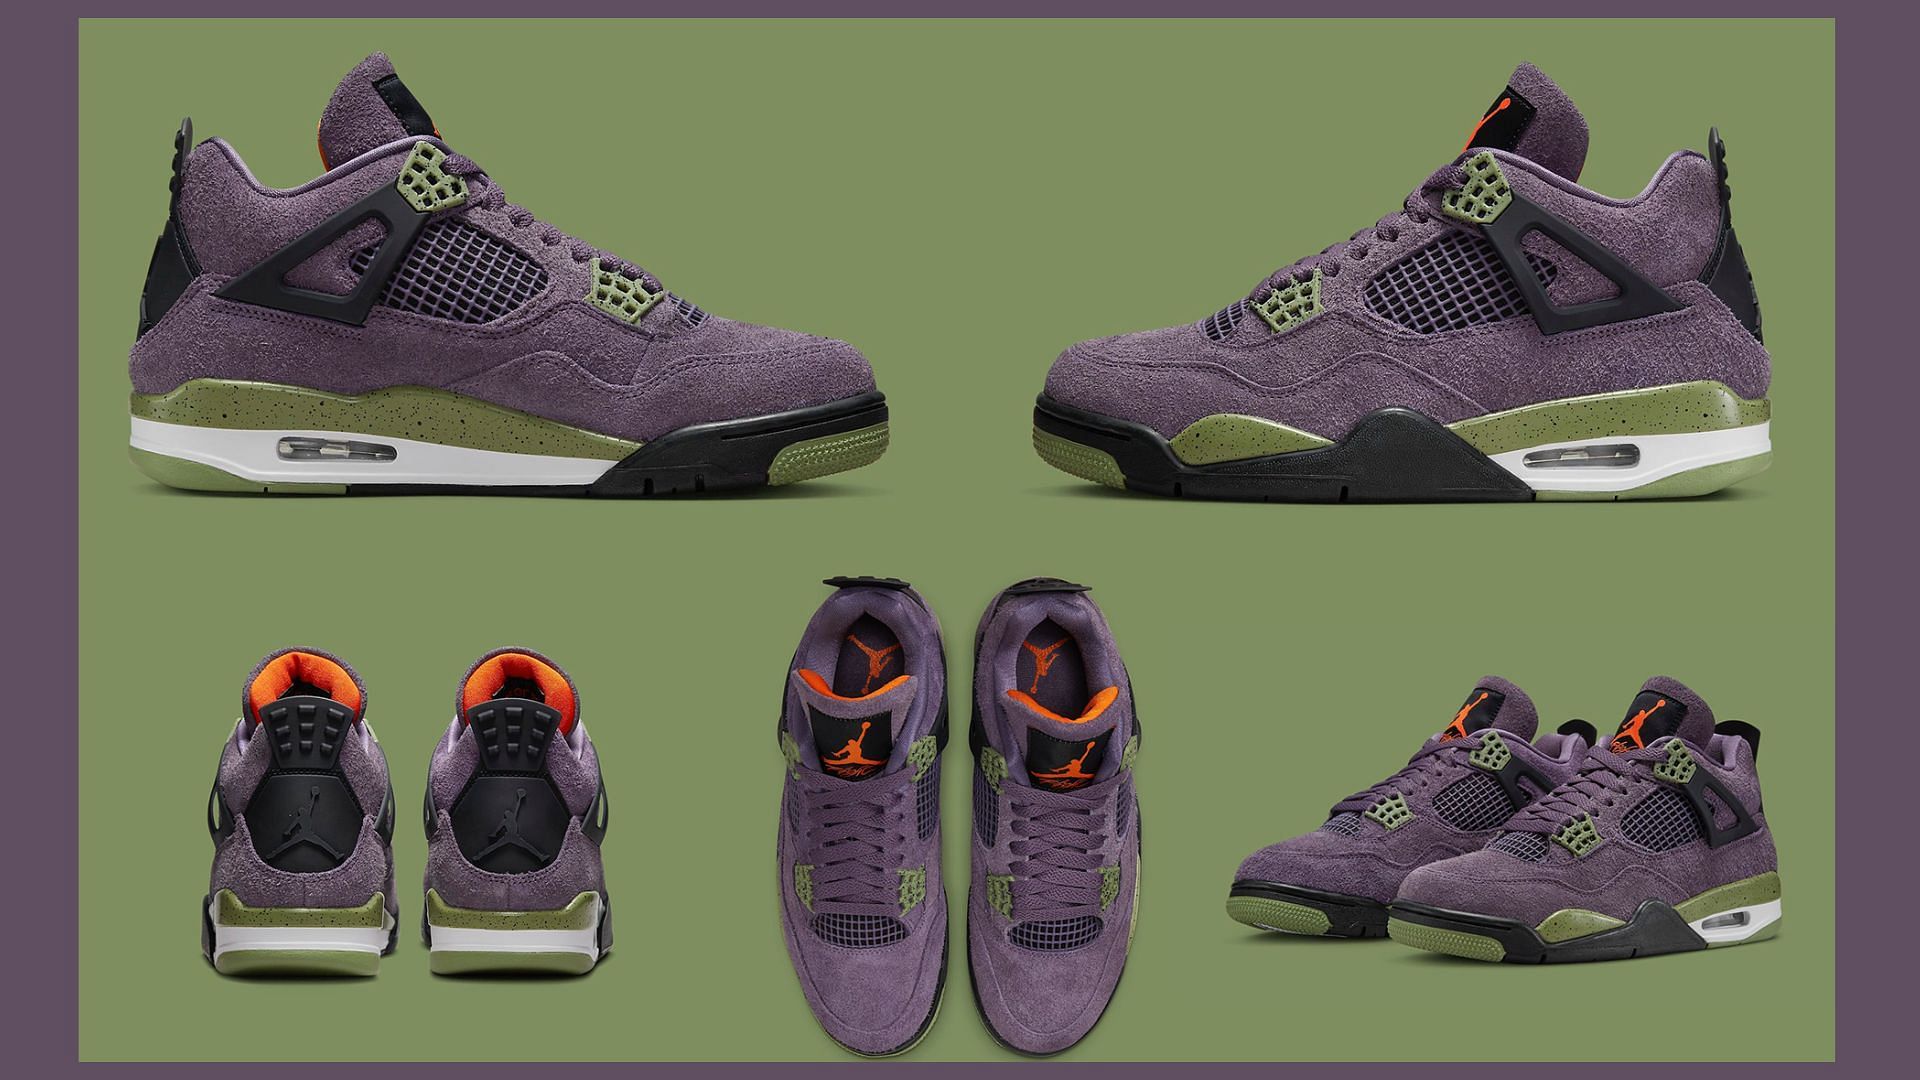 Take a detailed look at the upcoming AJ 4 Canyon Purple sneakers (Image via Sportskeeda)